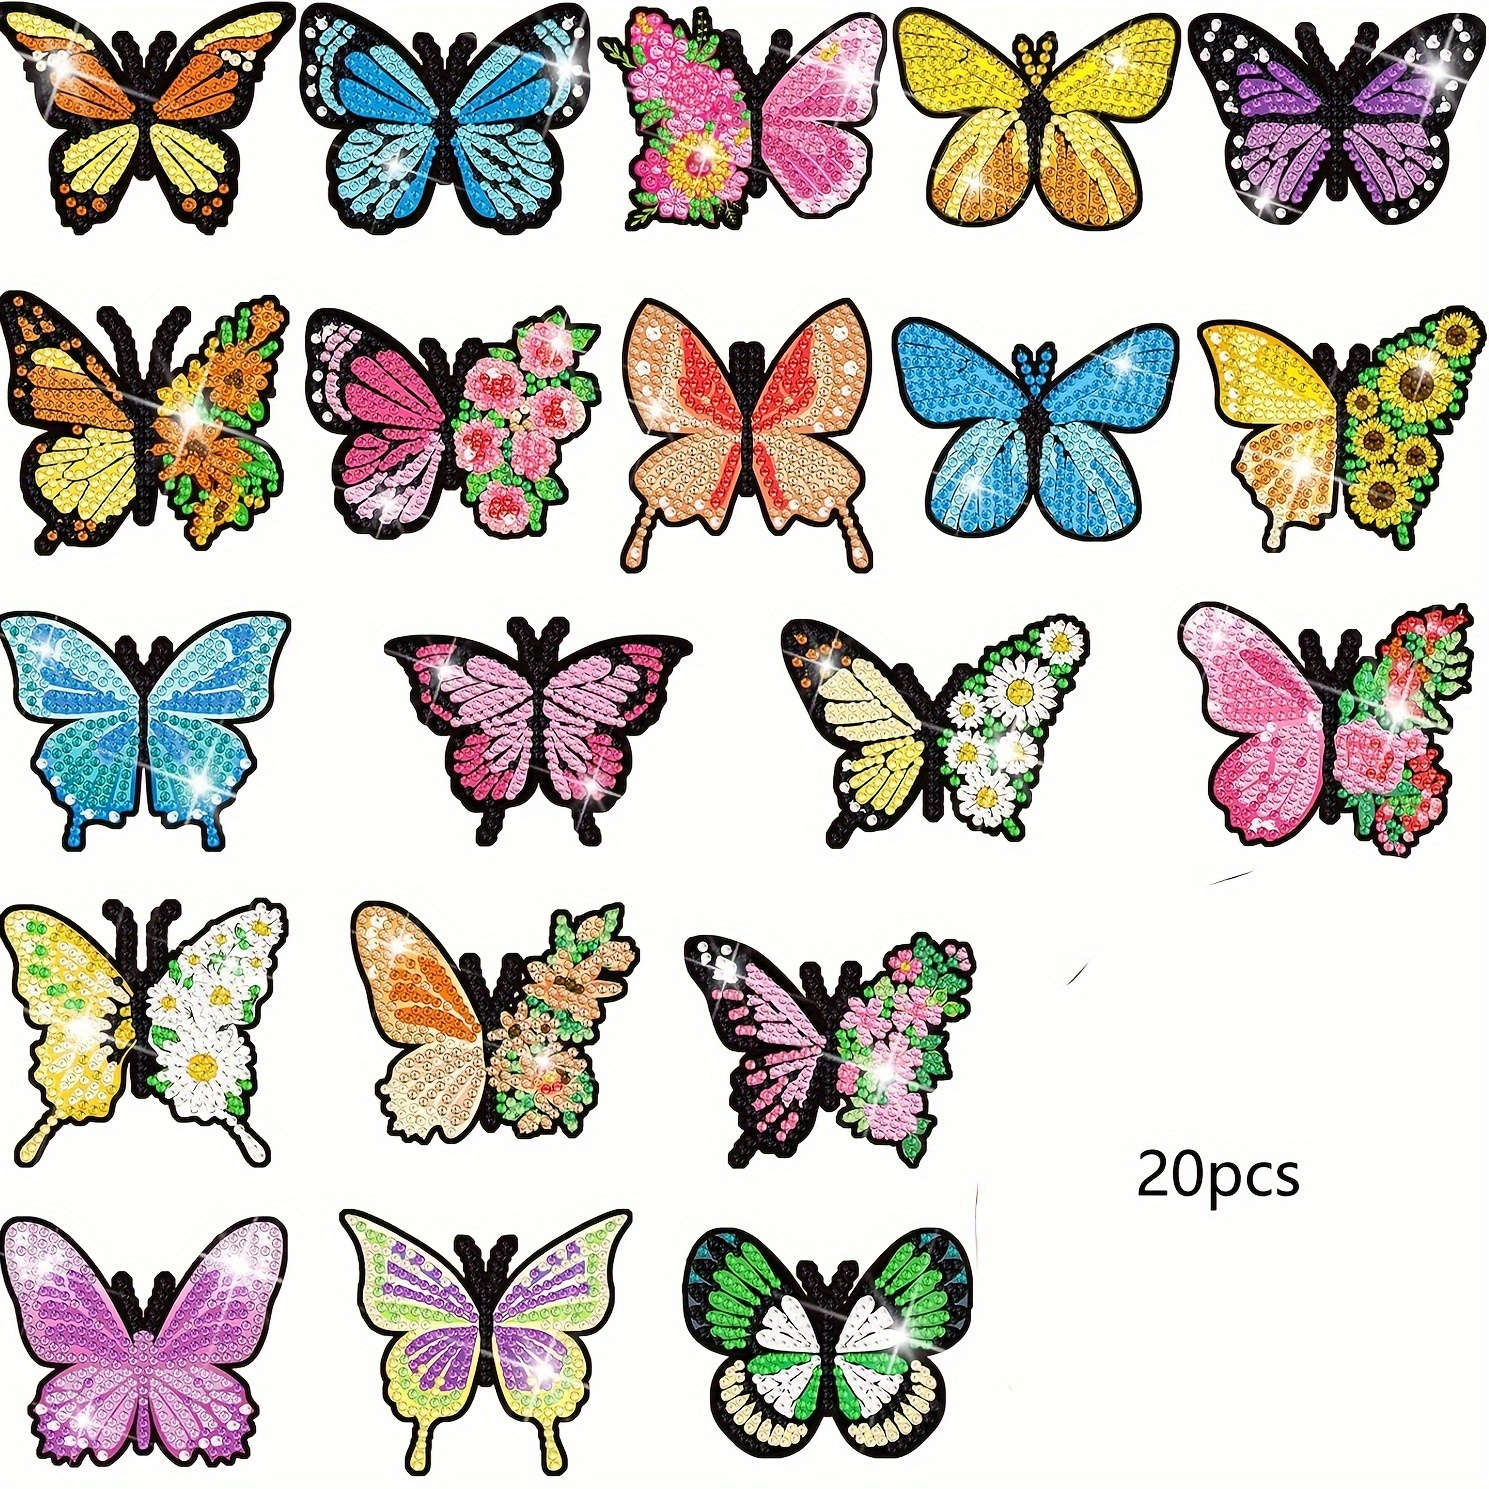 

20pcs Faux Diamond Painting Magnet Kit, For Making Butterfly Fridge Stickers, Faux Diamond Art Set For Beginners, Decorative Refrigerator Magnets, Craft Gift For Home Decors